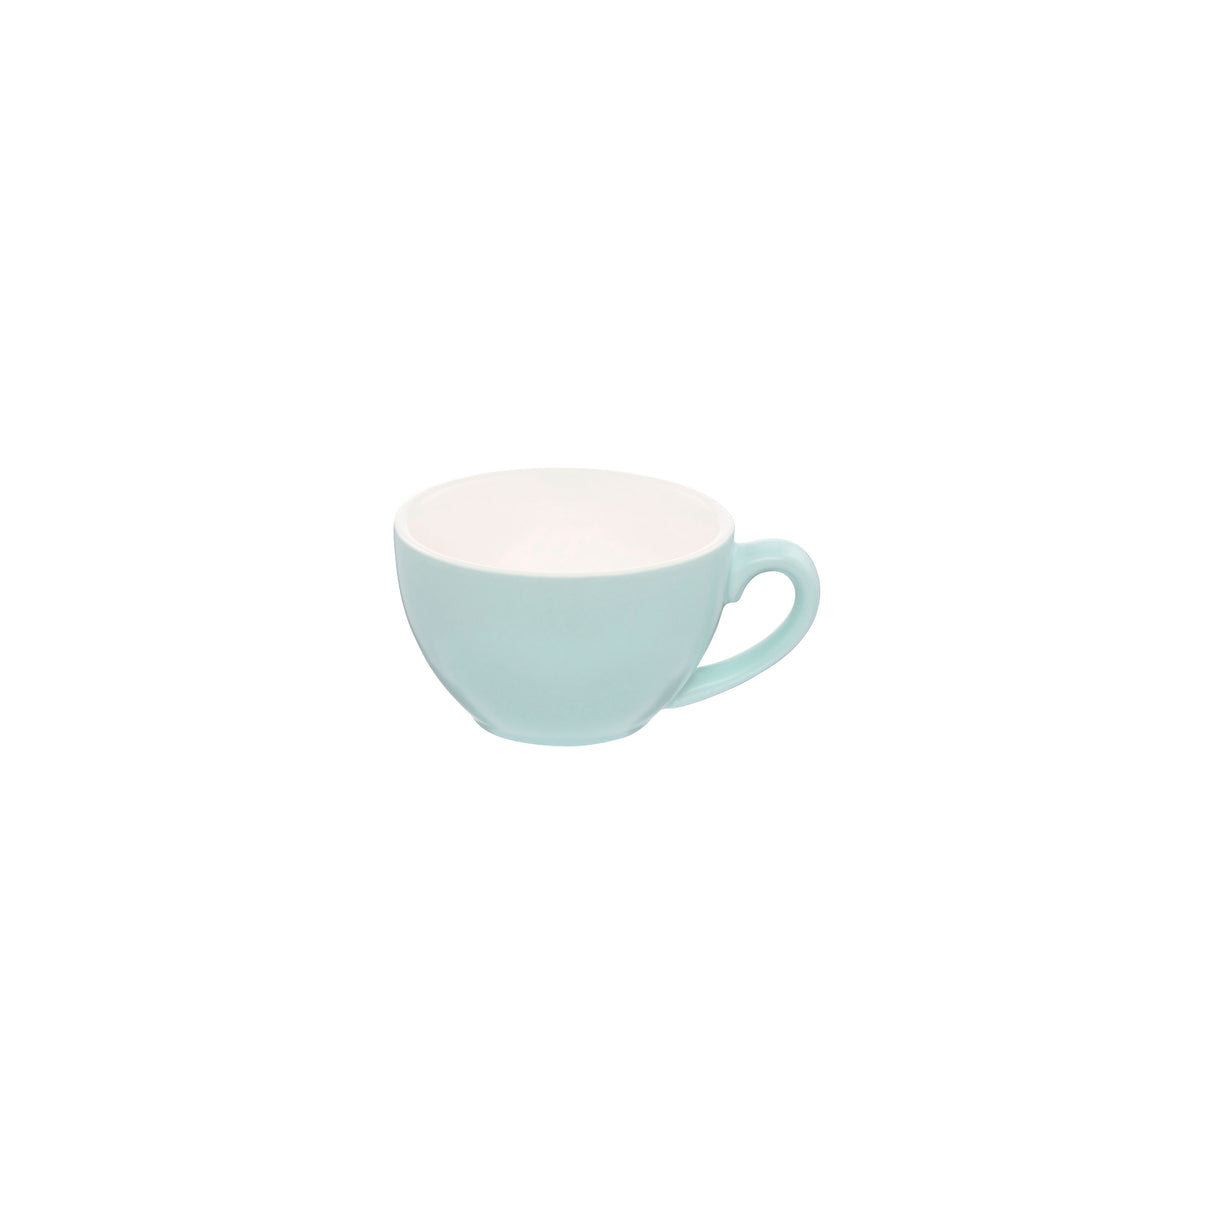 Cappuccino cup - Mist, 200ml, Intorno: Pack of 6